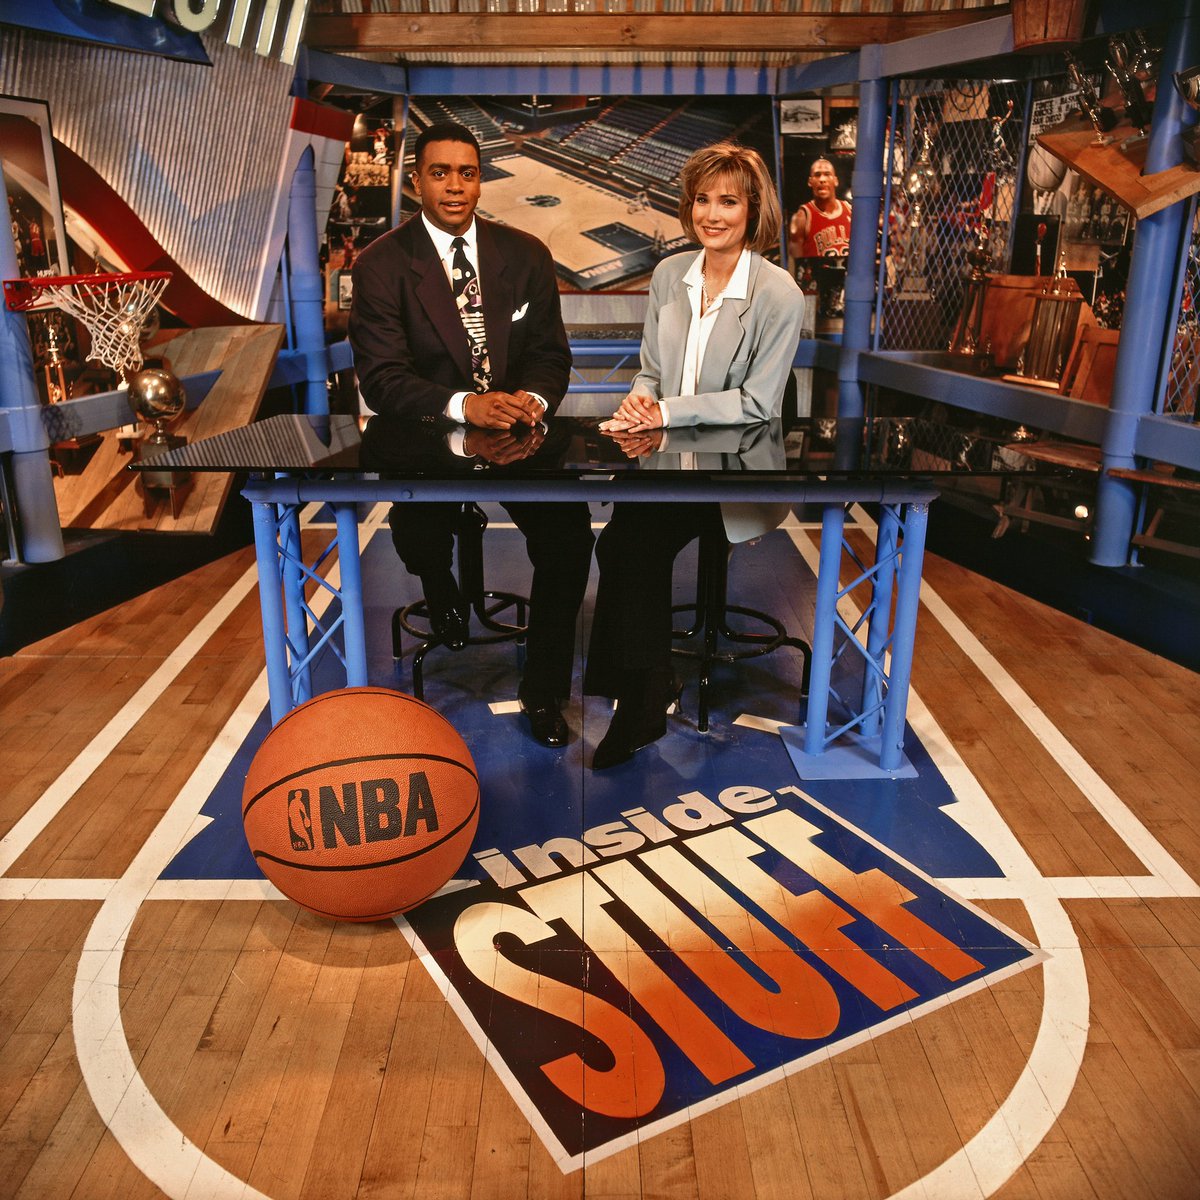 Excited to honor NBA Inside Stuff into the Curt Gowdy Transformative Media Award family. What’s your favorite memory from the show? 🏀📺 #GowdyAward